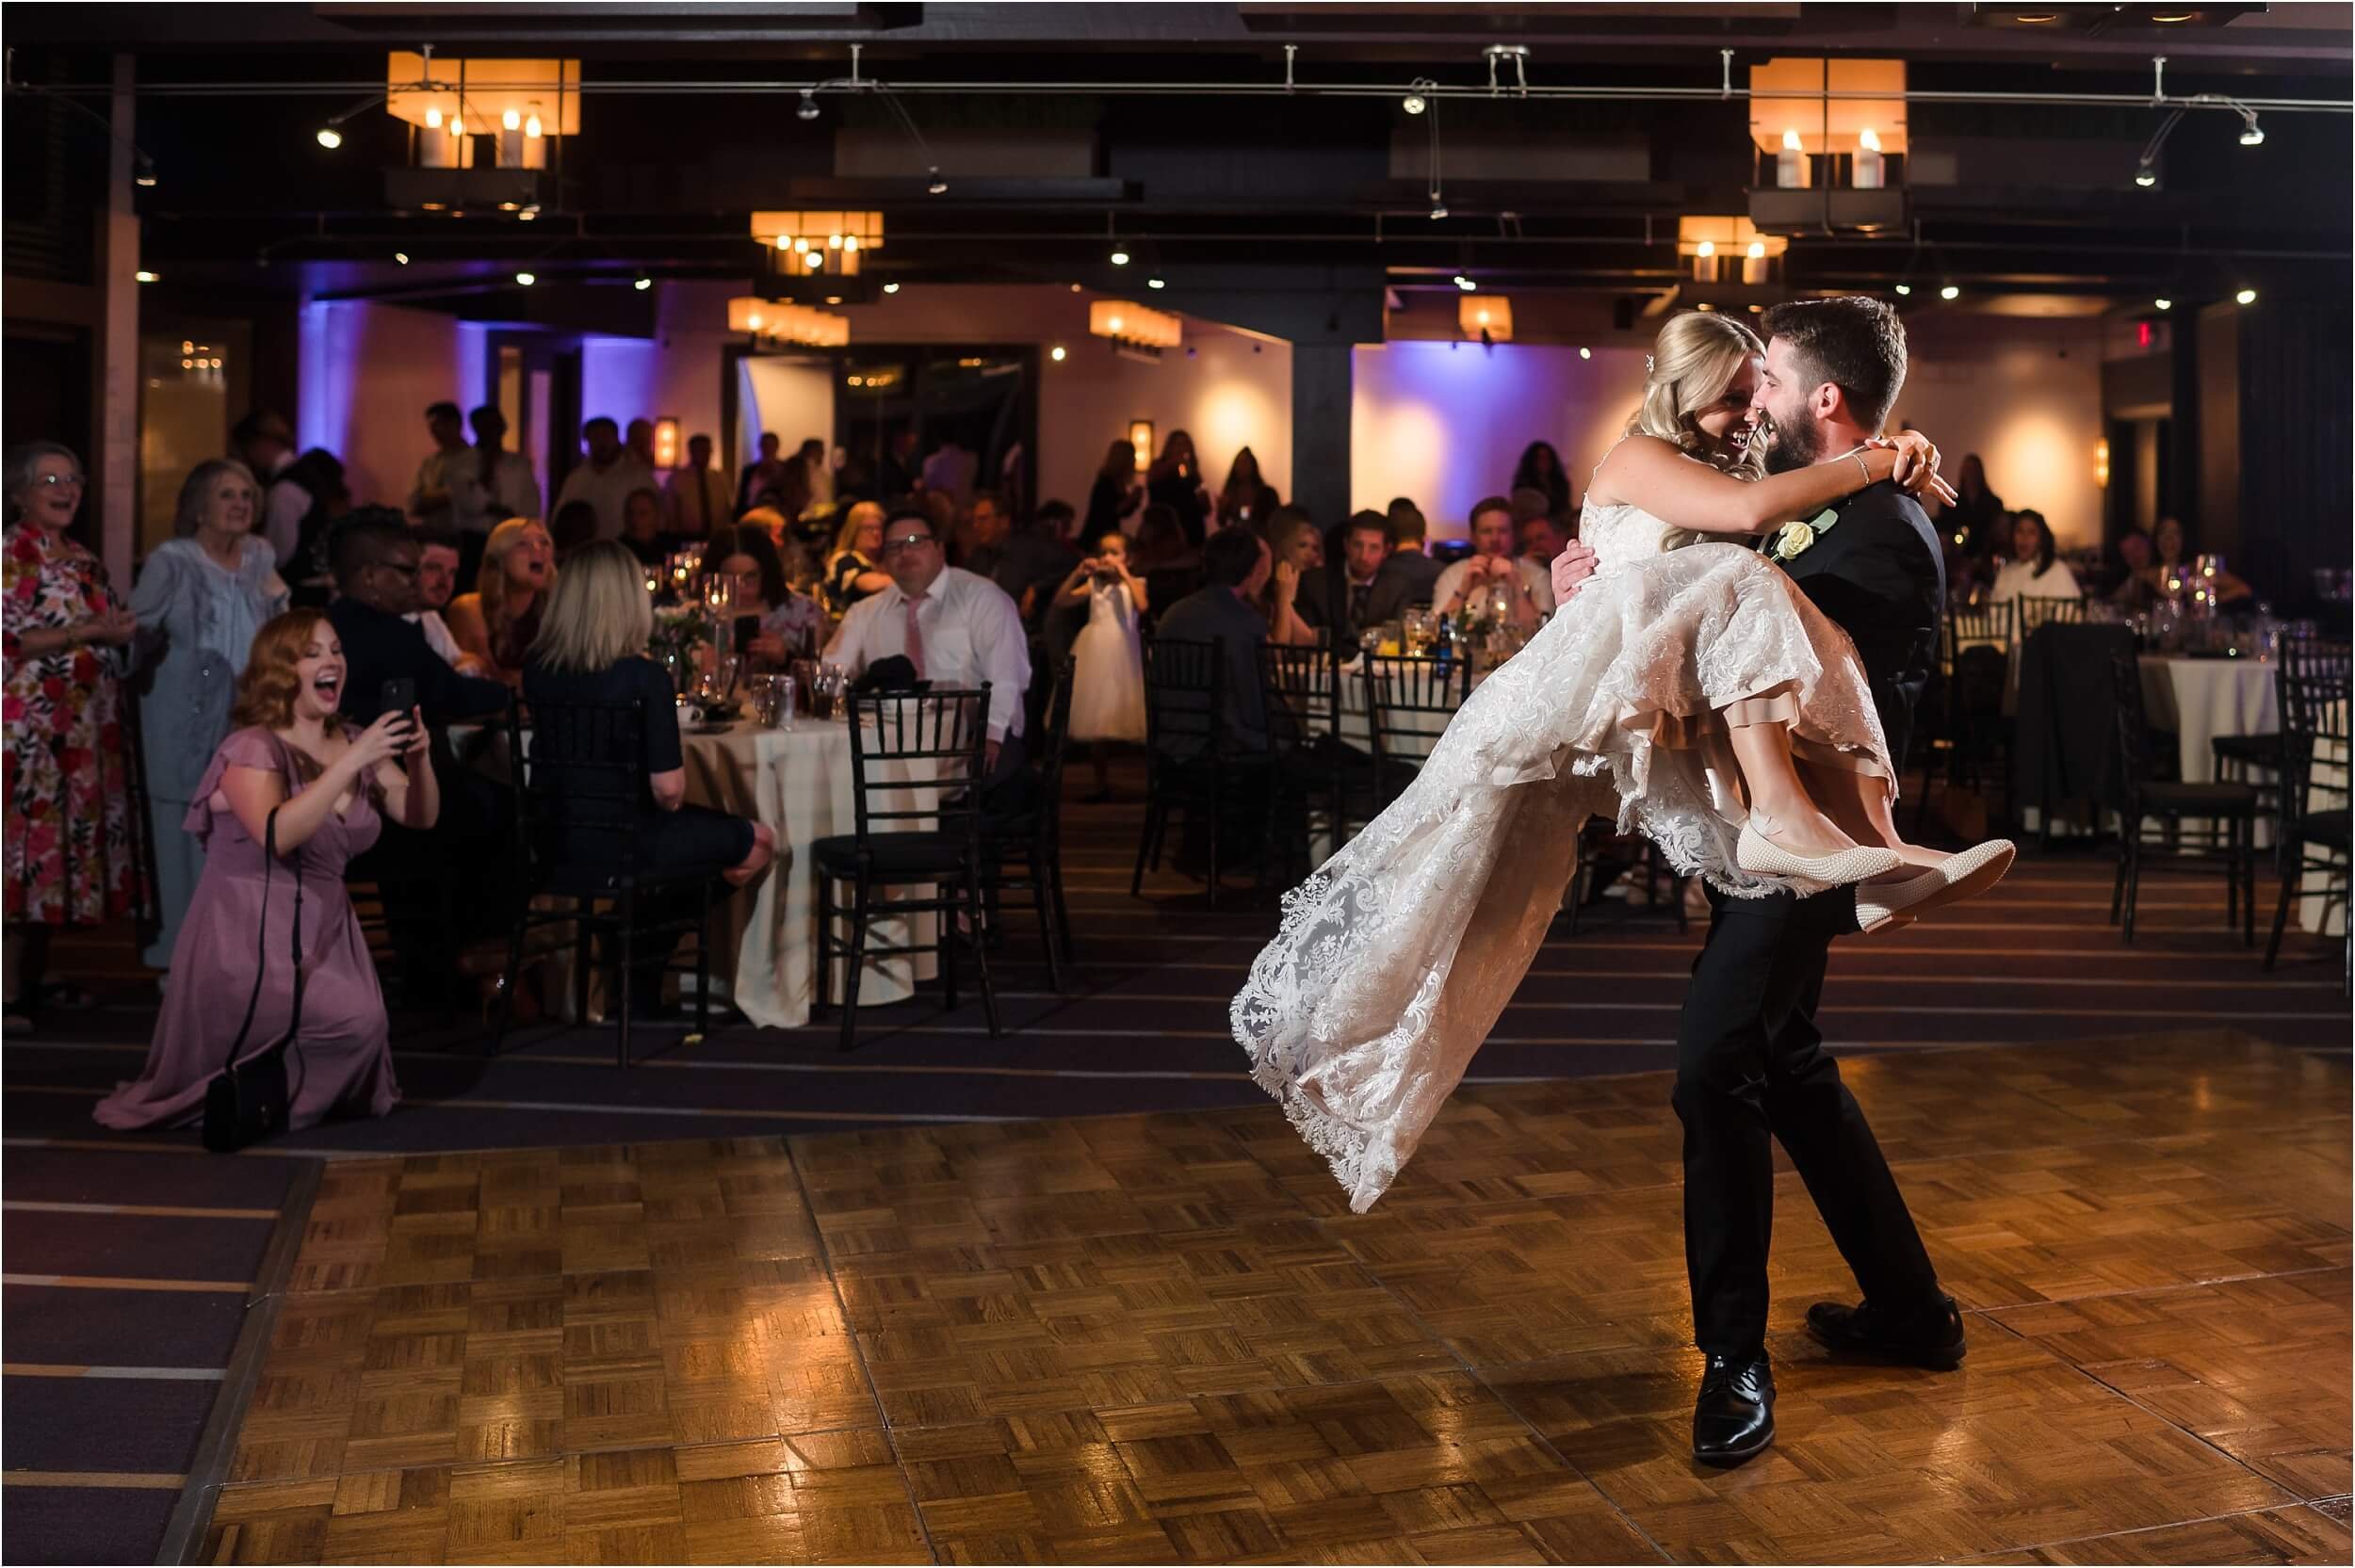  A groom lifts and dances with his bride during their first dance.  